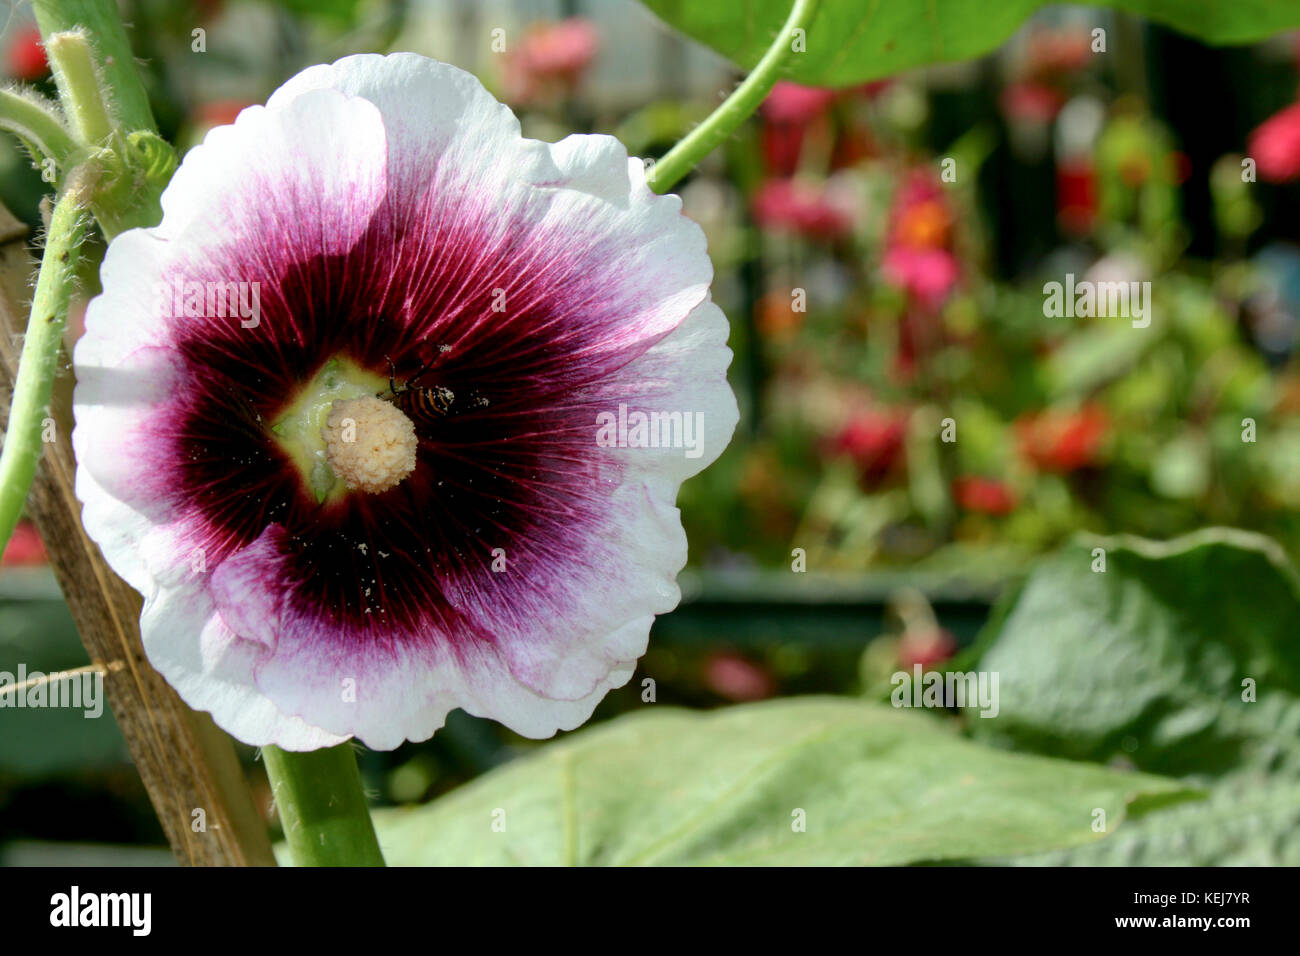 Hibiscus flower with violet cone, white rim and white stylus Stock Photo -  Alamy